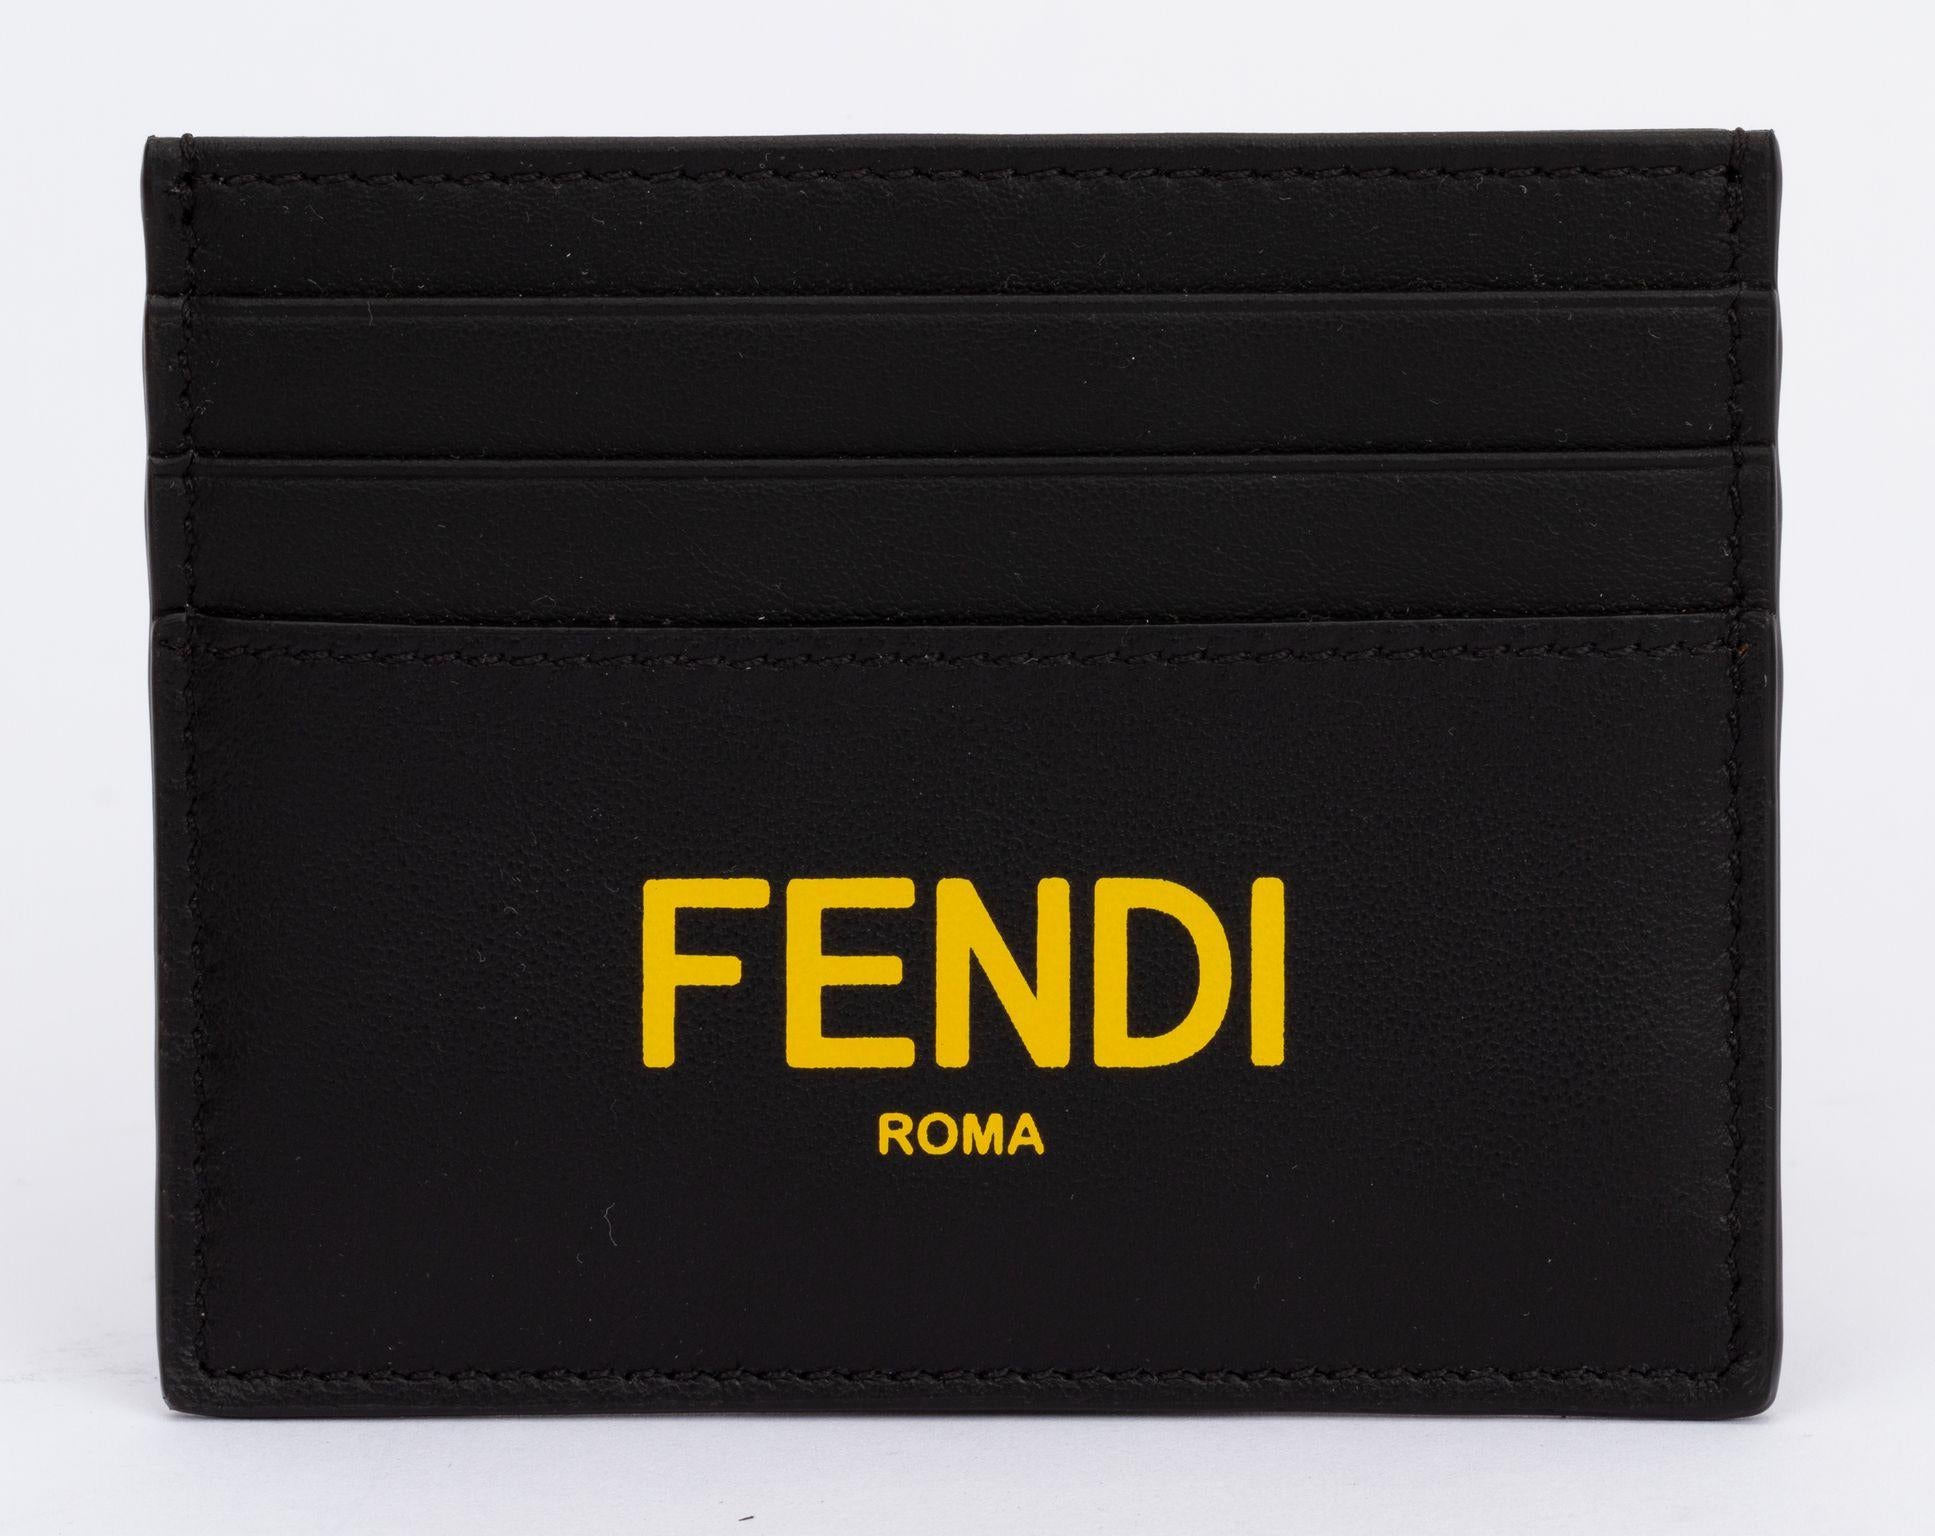 Fendi leather wallet in black. On the front Fendi is written in a bright yellow. The holder comes with 6 card departments. It is new and includes tag, booklet, original box and dust cover.